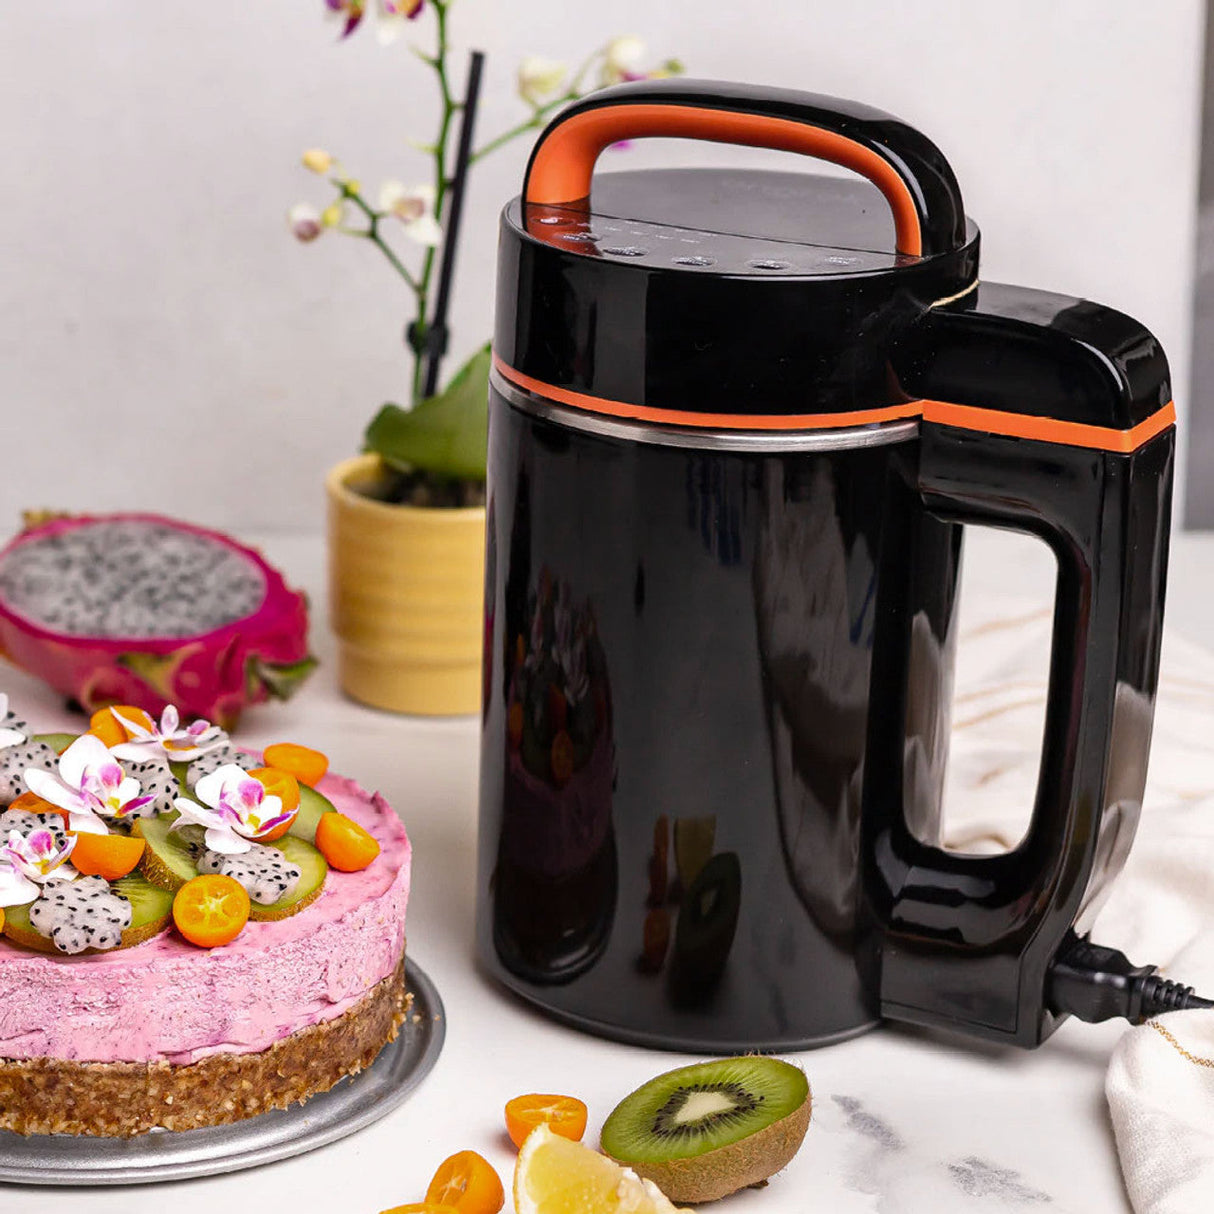 Ongrok Botanical Infuser Machine in black with orange trim, next to a fruit cake, front view